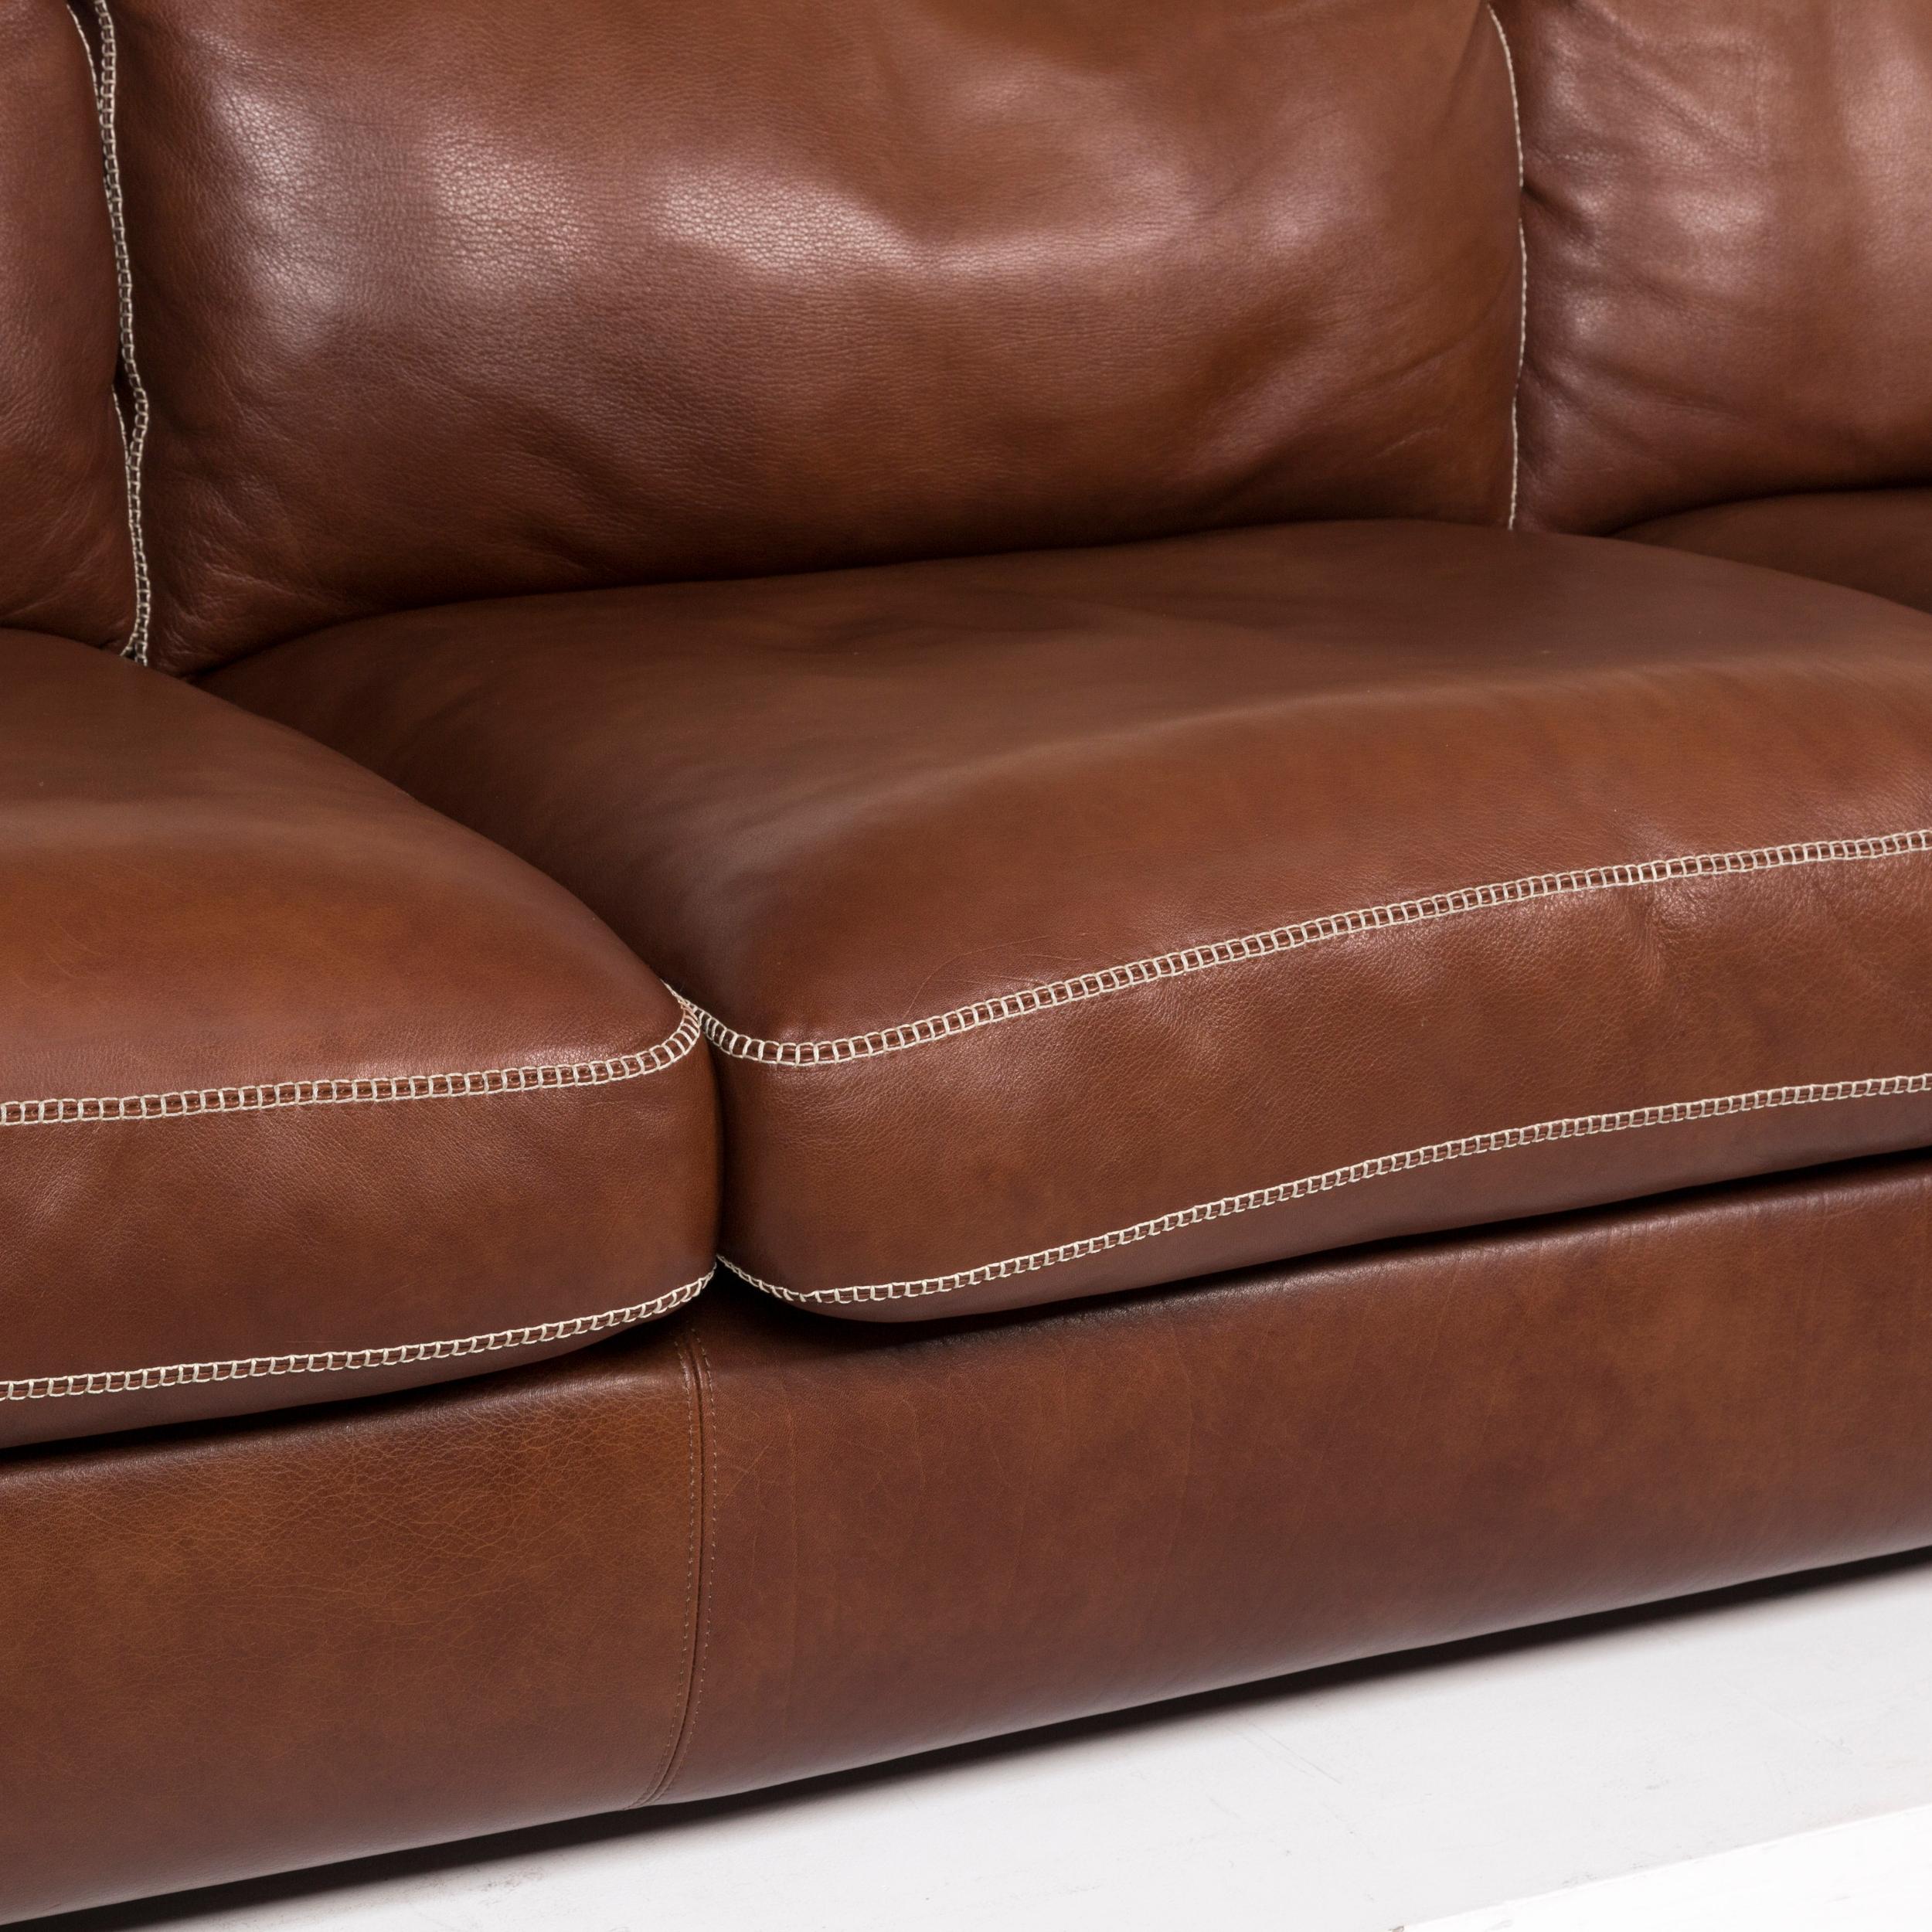 We bring to you a Machalke Valentino leather sofa brown three-seat couch.


 Product measurements in centimeters:
 

Depth 96
Width 267
Height 72
Seat-height 44
Rest-height 60
Seat-depth 61
Seat-width 162
Back-height 30.
 